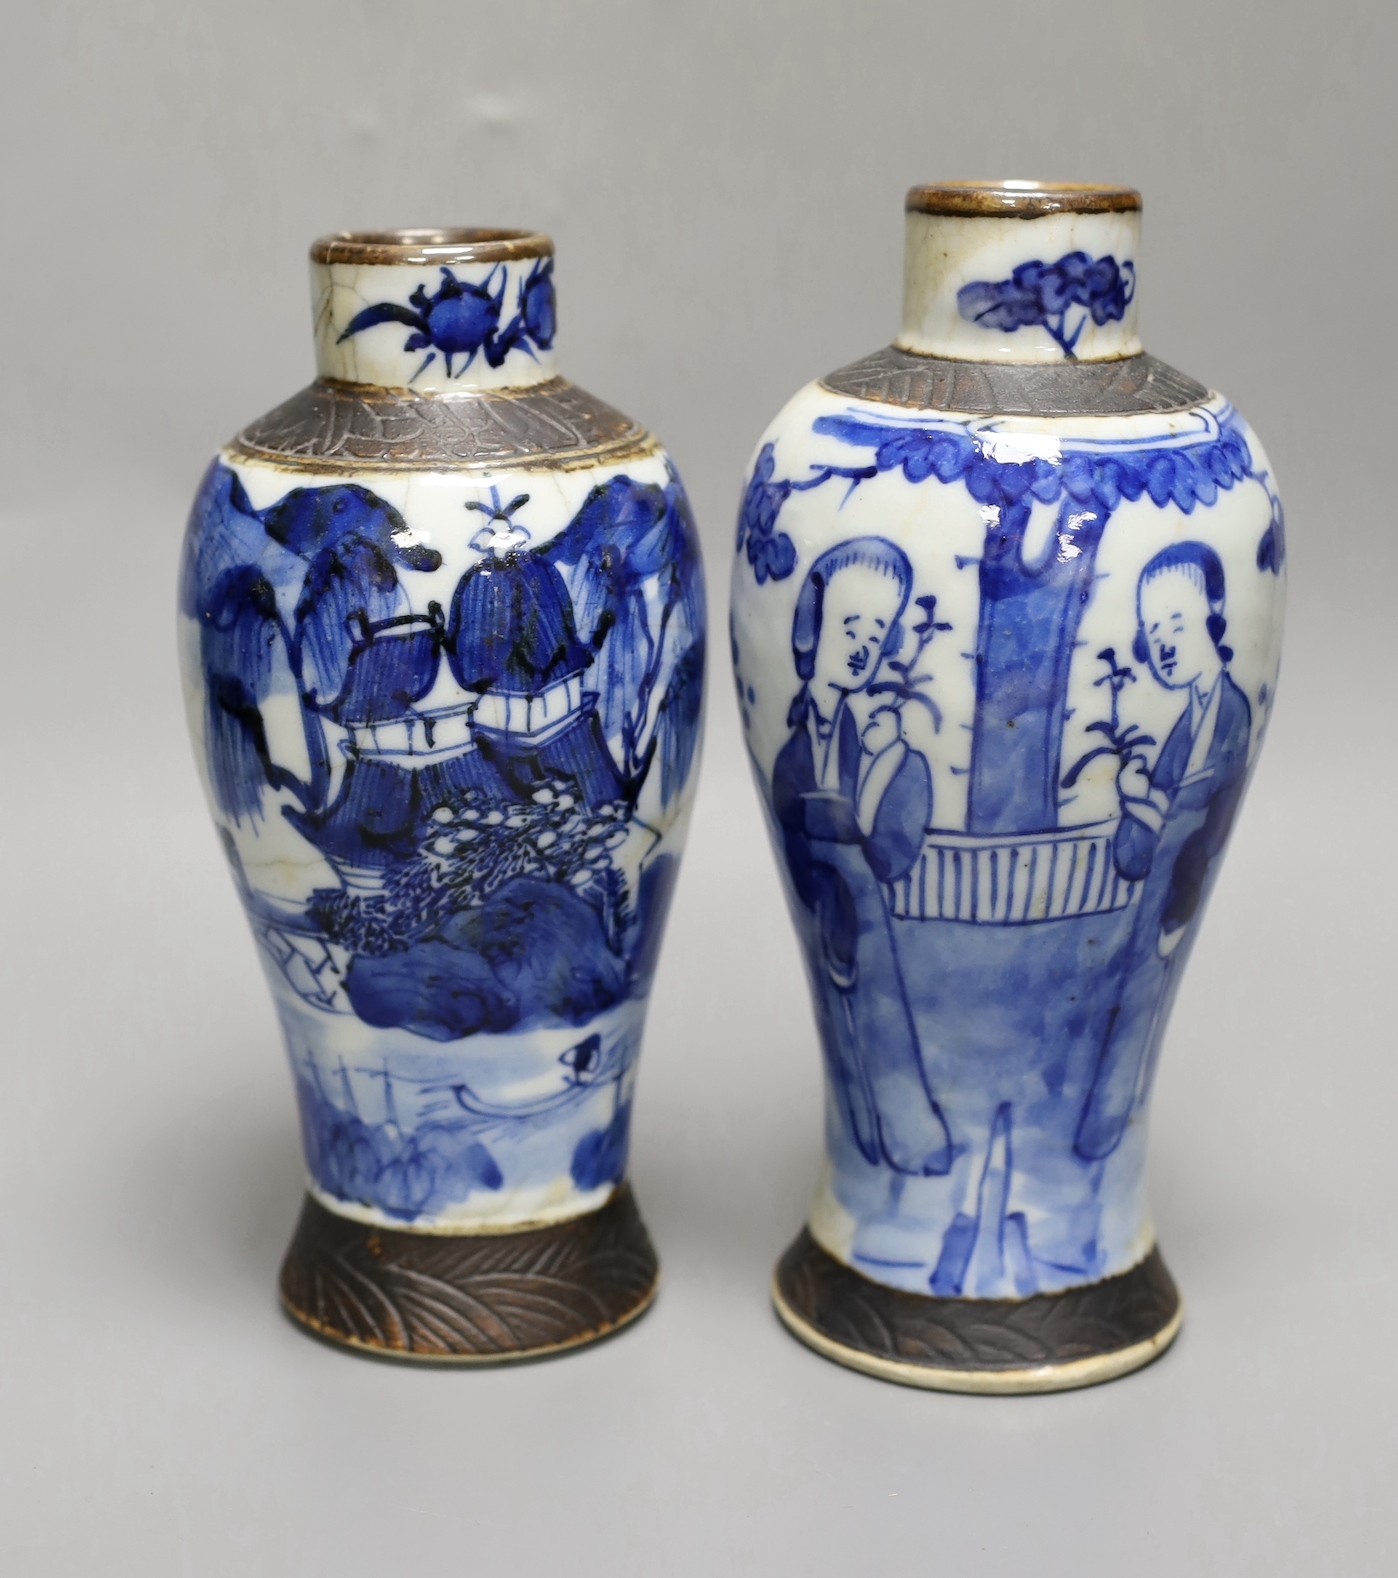 Two Chinese blue and white crackleglaze vases, 19th century, 21.5cm